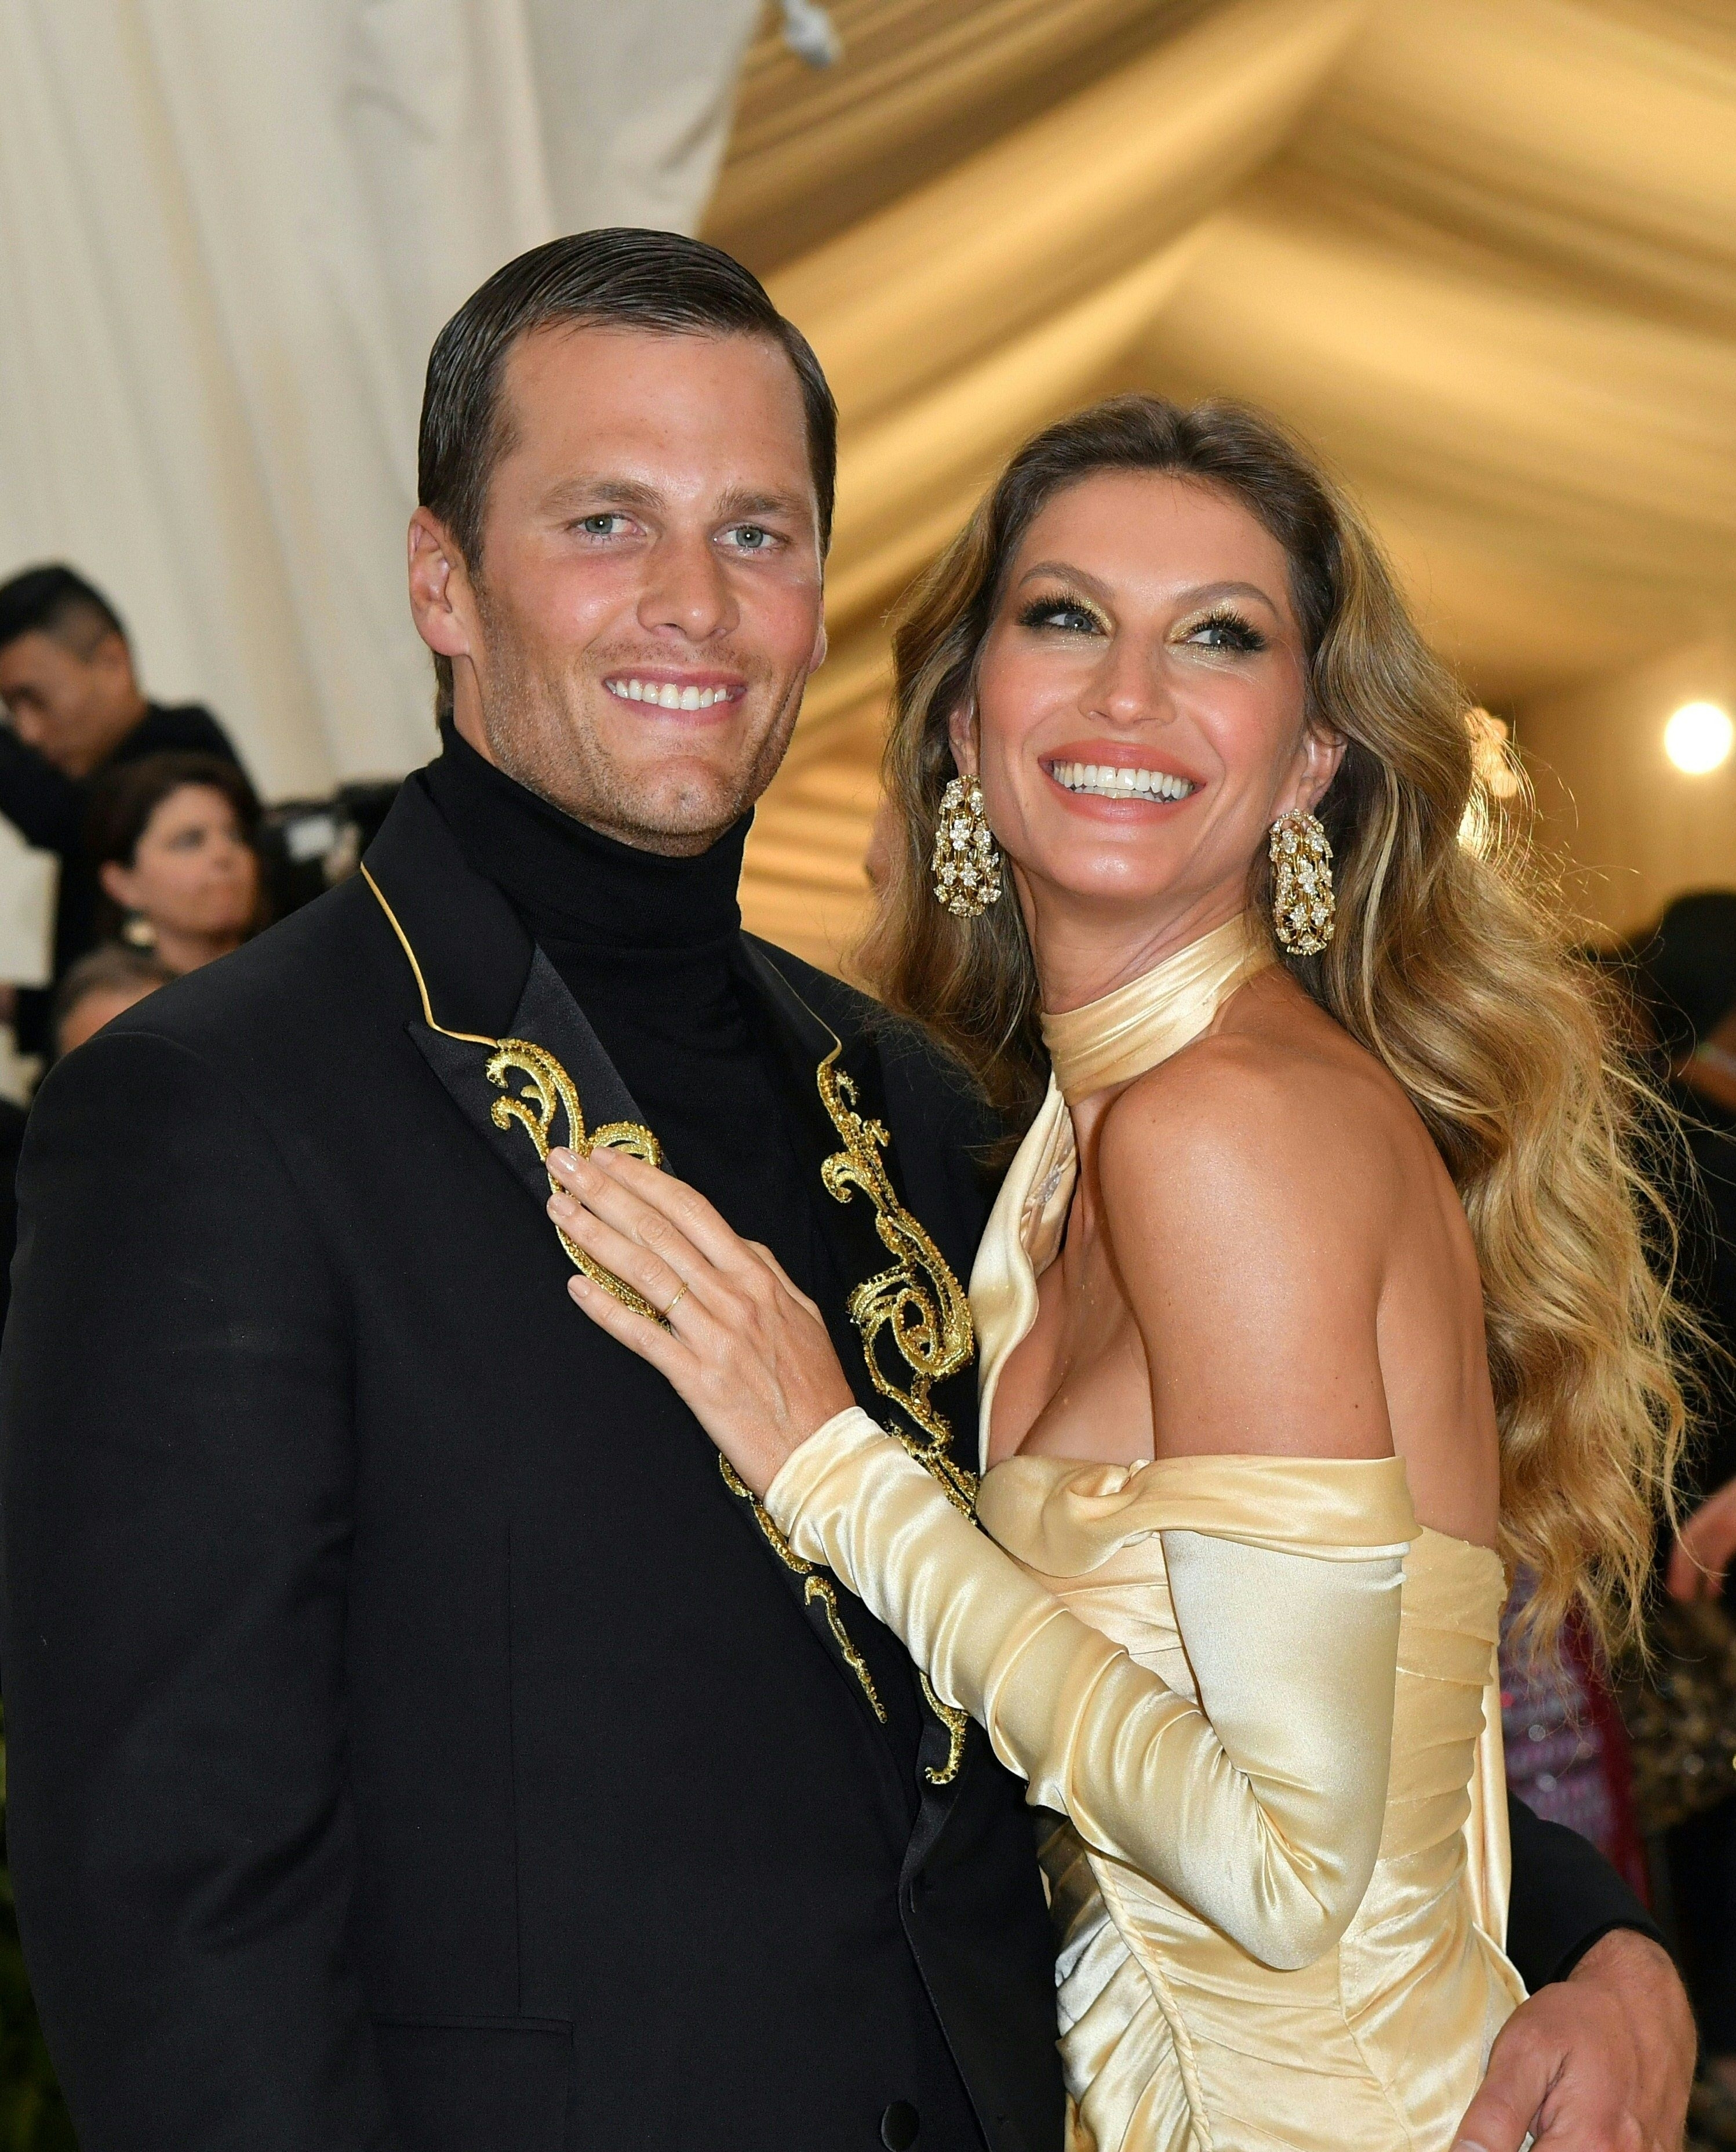 Tom Brady and Gisele Bündchen smiling at an event, Brady in a black outfit with gold detailing, Bündchen in an off-the-shoulder gold gown